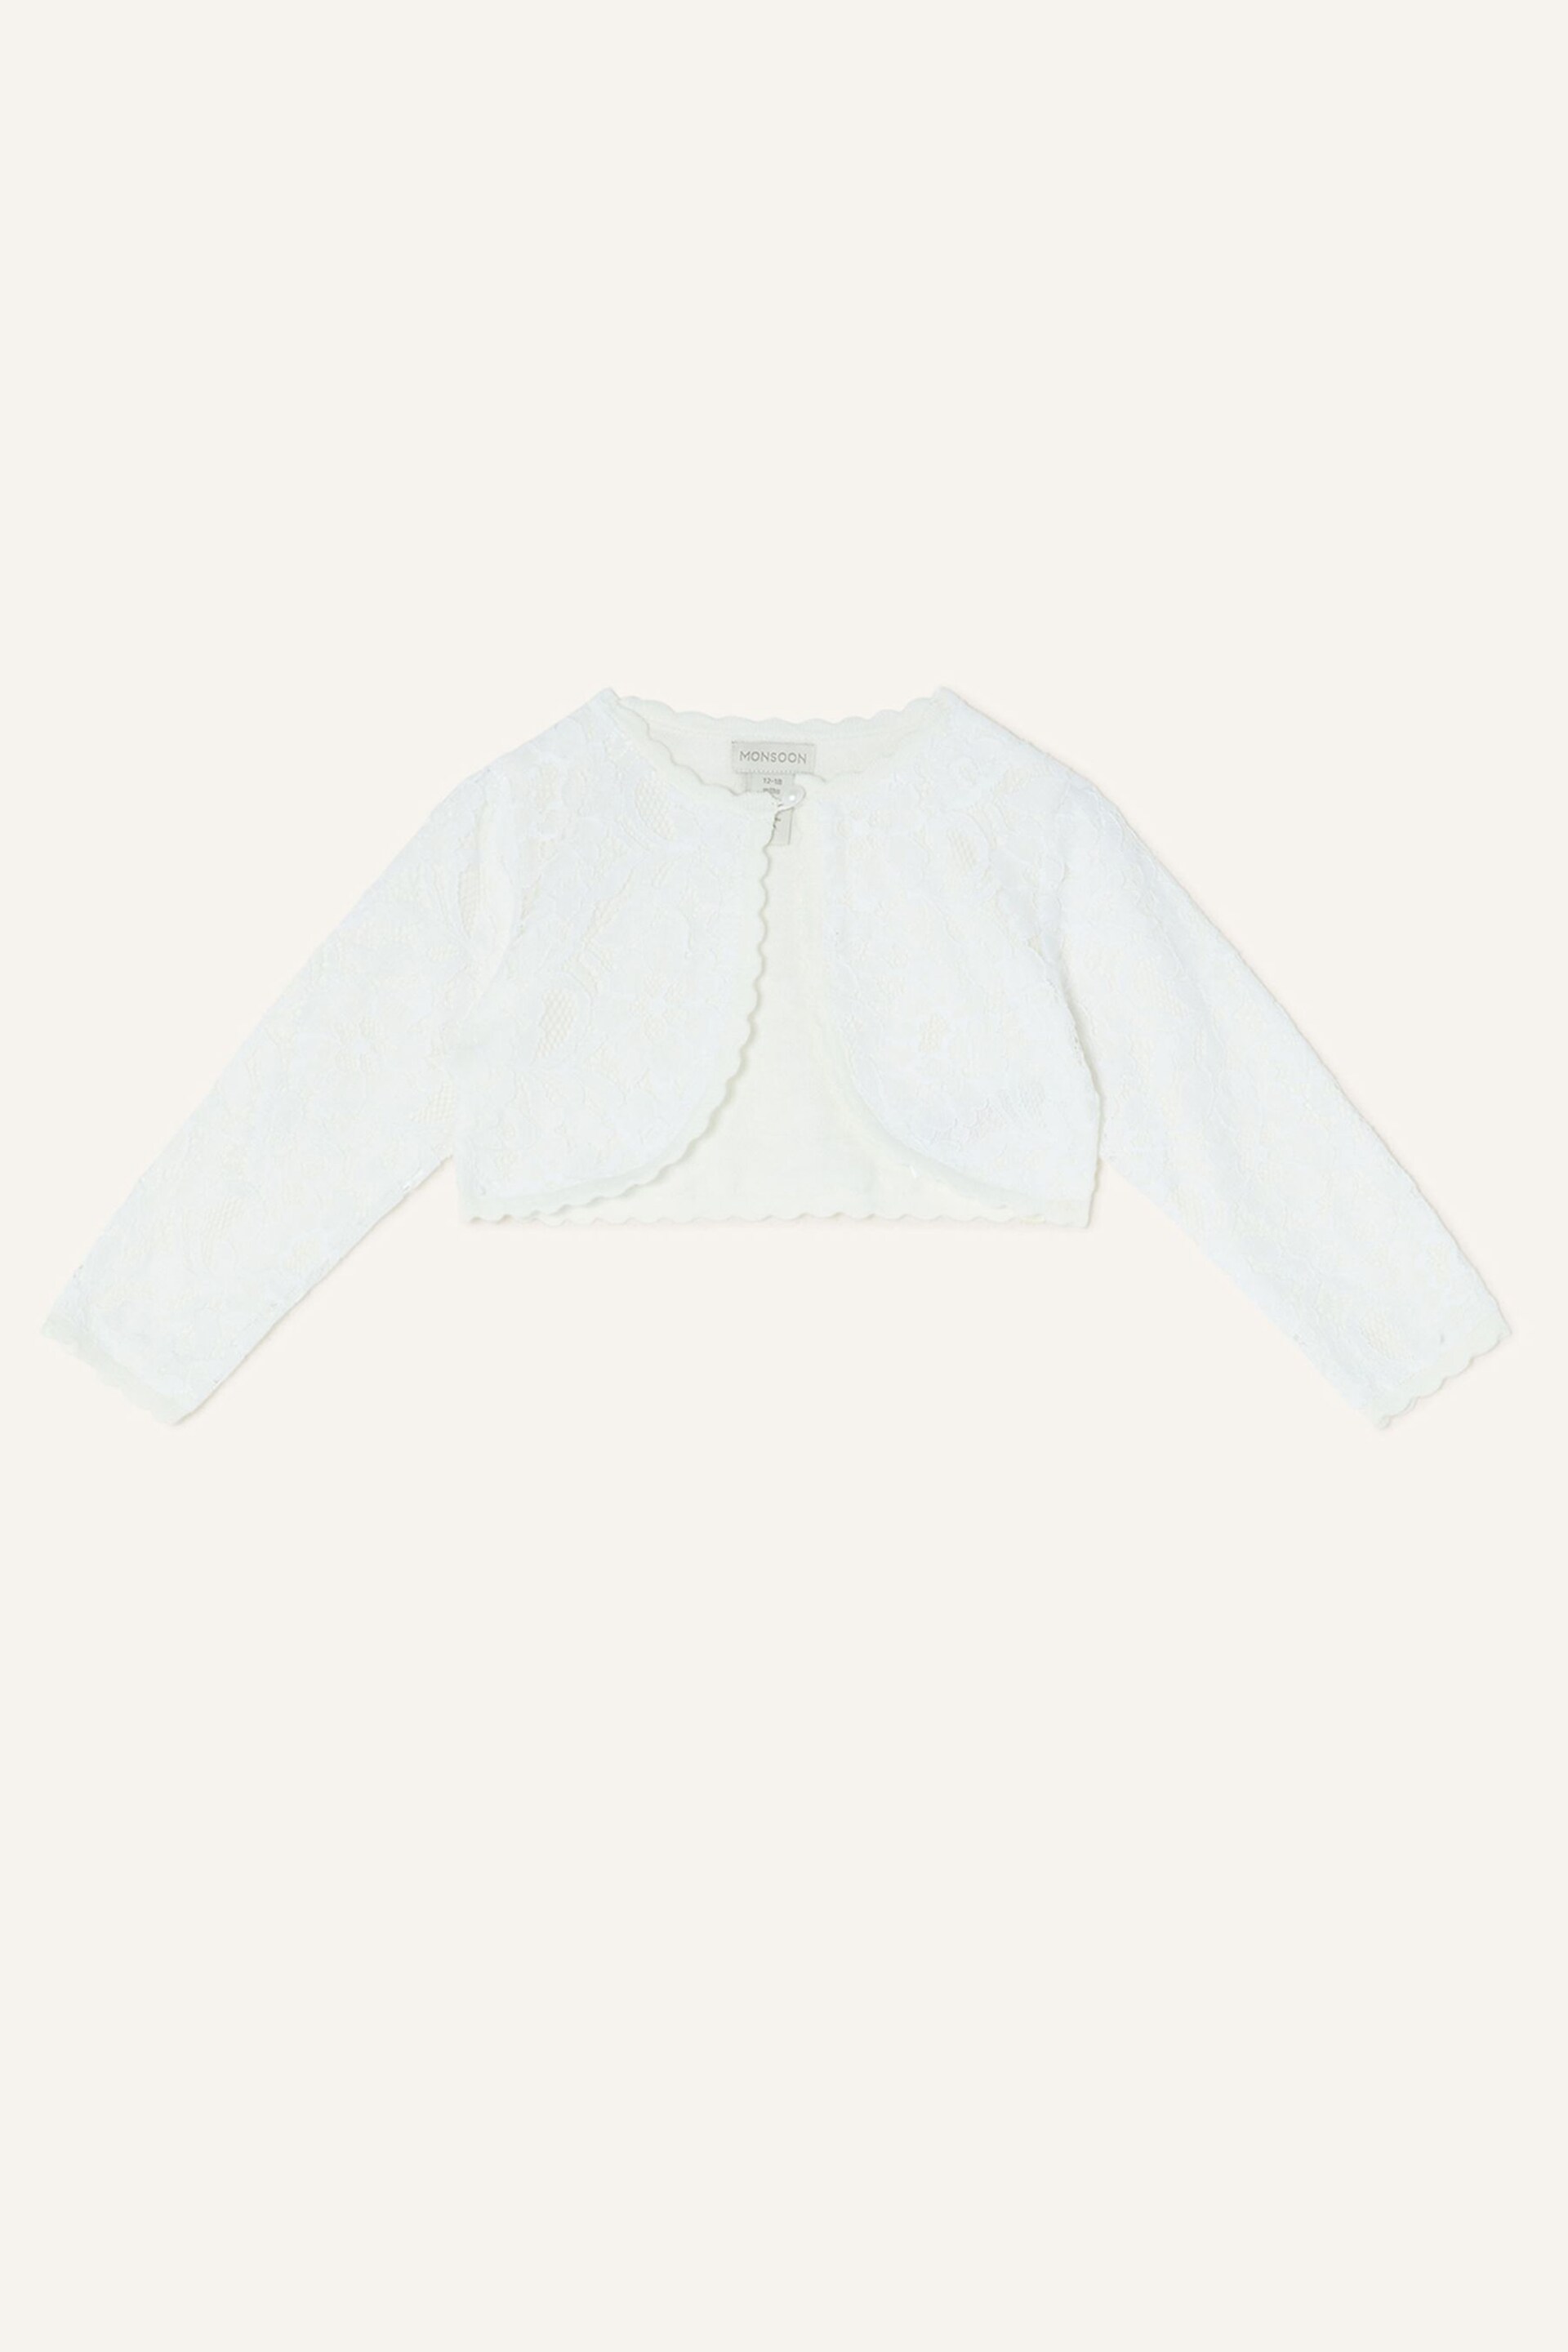 Monsoon Natural Baby Lace Cardigan - Image 1 of 3